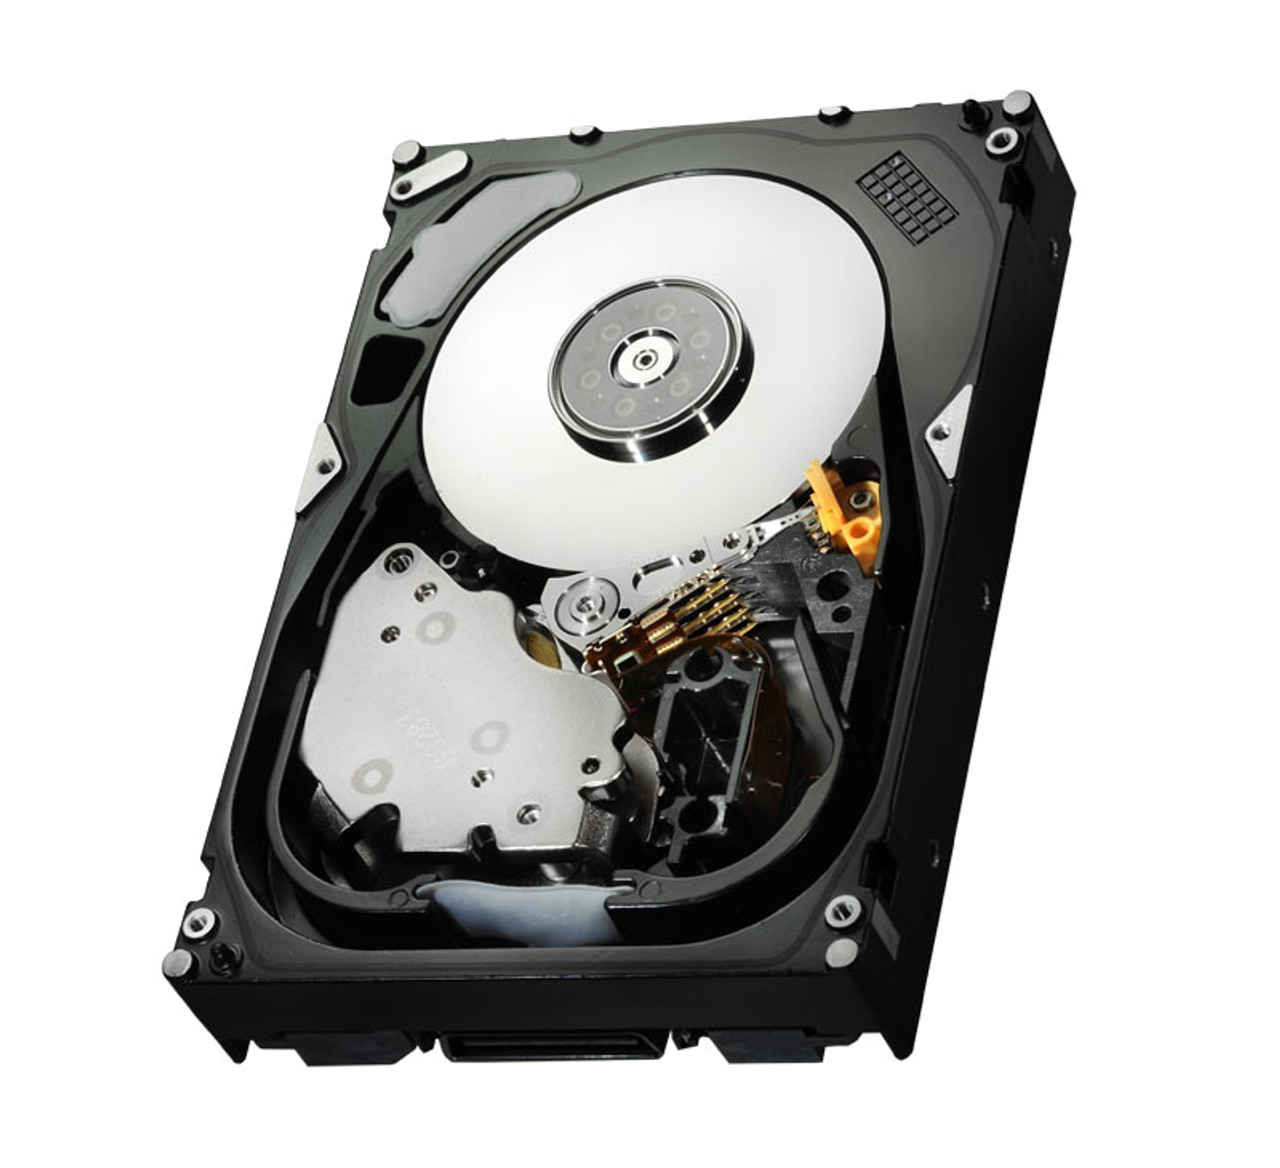 540-4519-06 Sun 73GB 10000RPM Fibre Channel 2Gbps 3.5-inch Internal Hard Drive with T3 Bracket